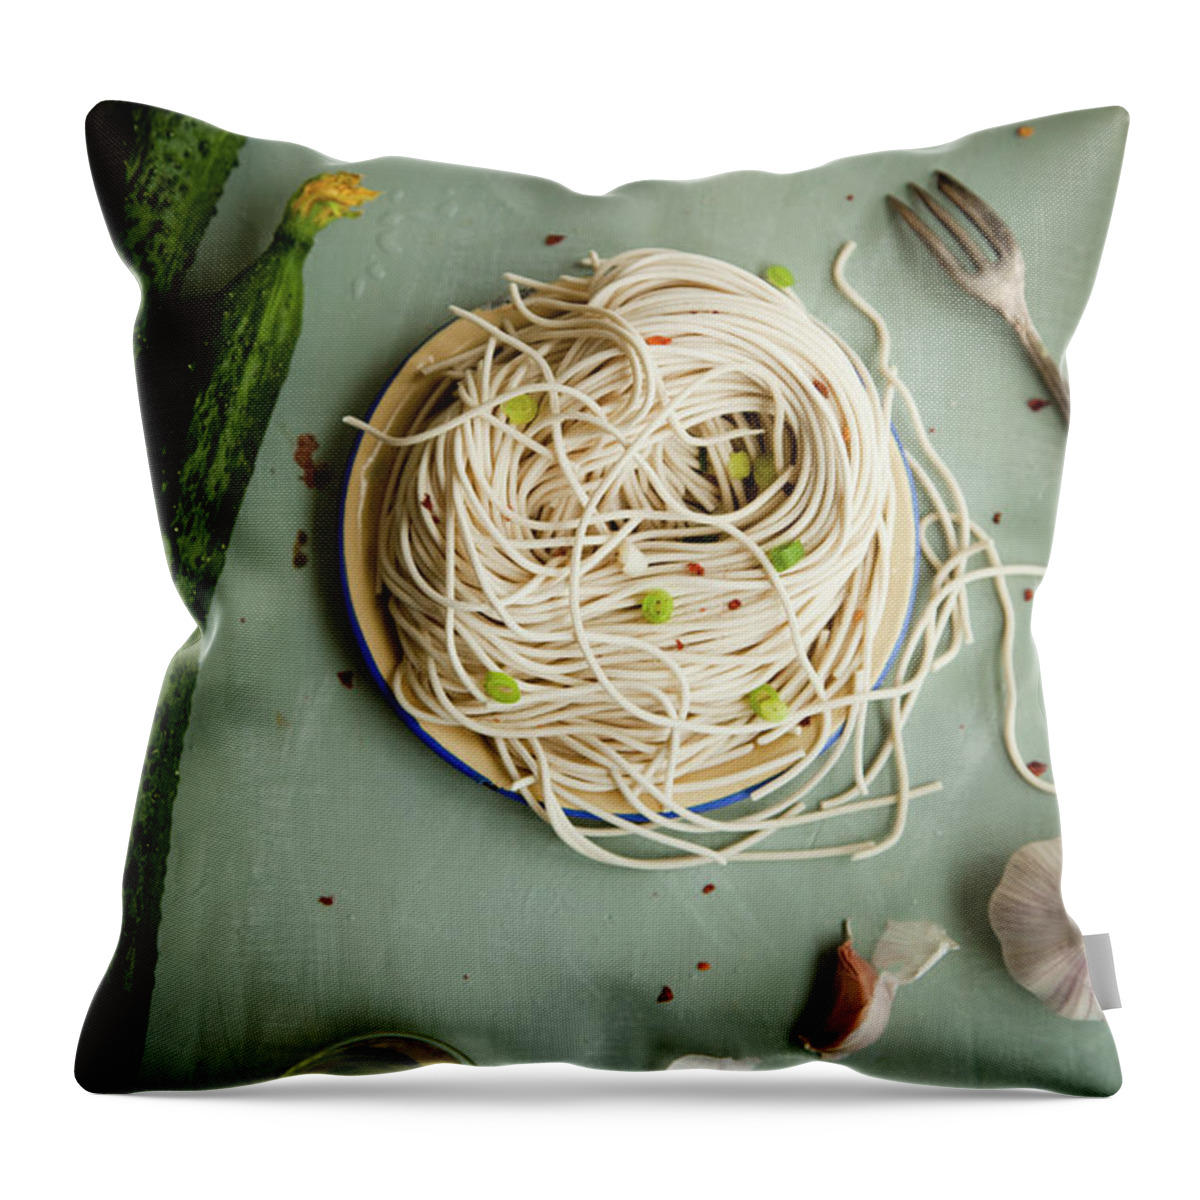 Chinese Culture Throw Pillow featuring the photograph Noodles by Feryersan